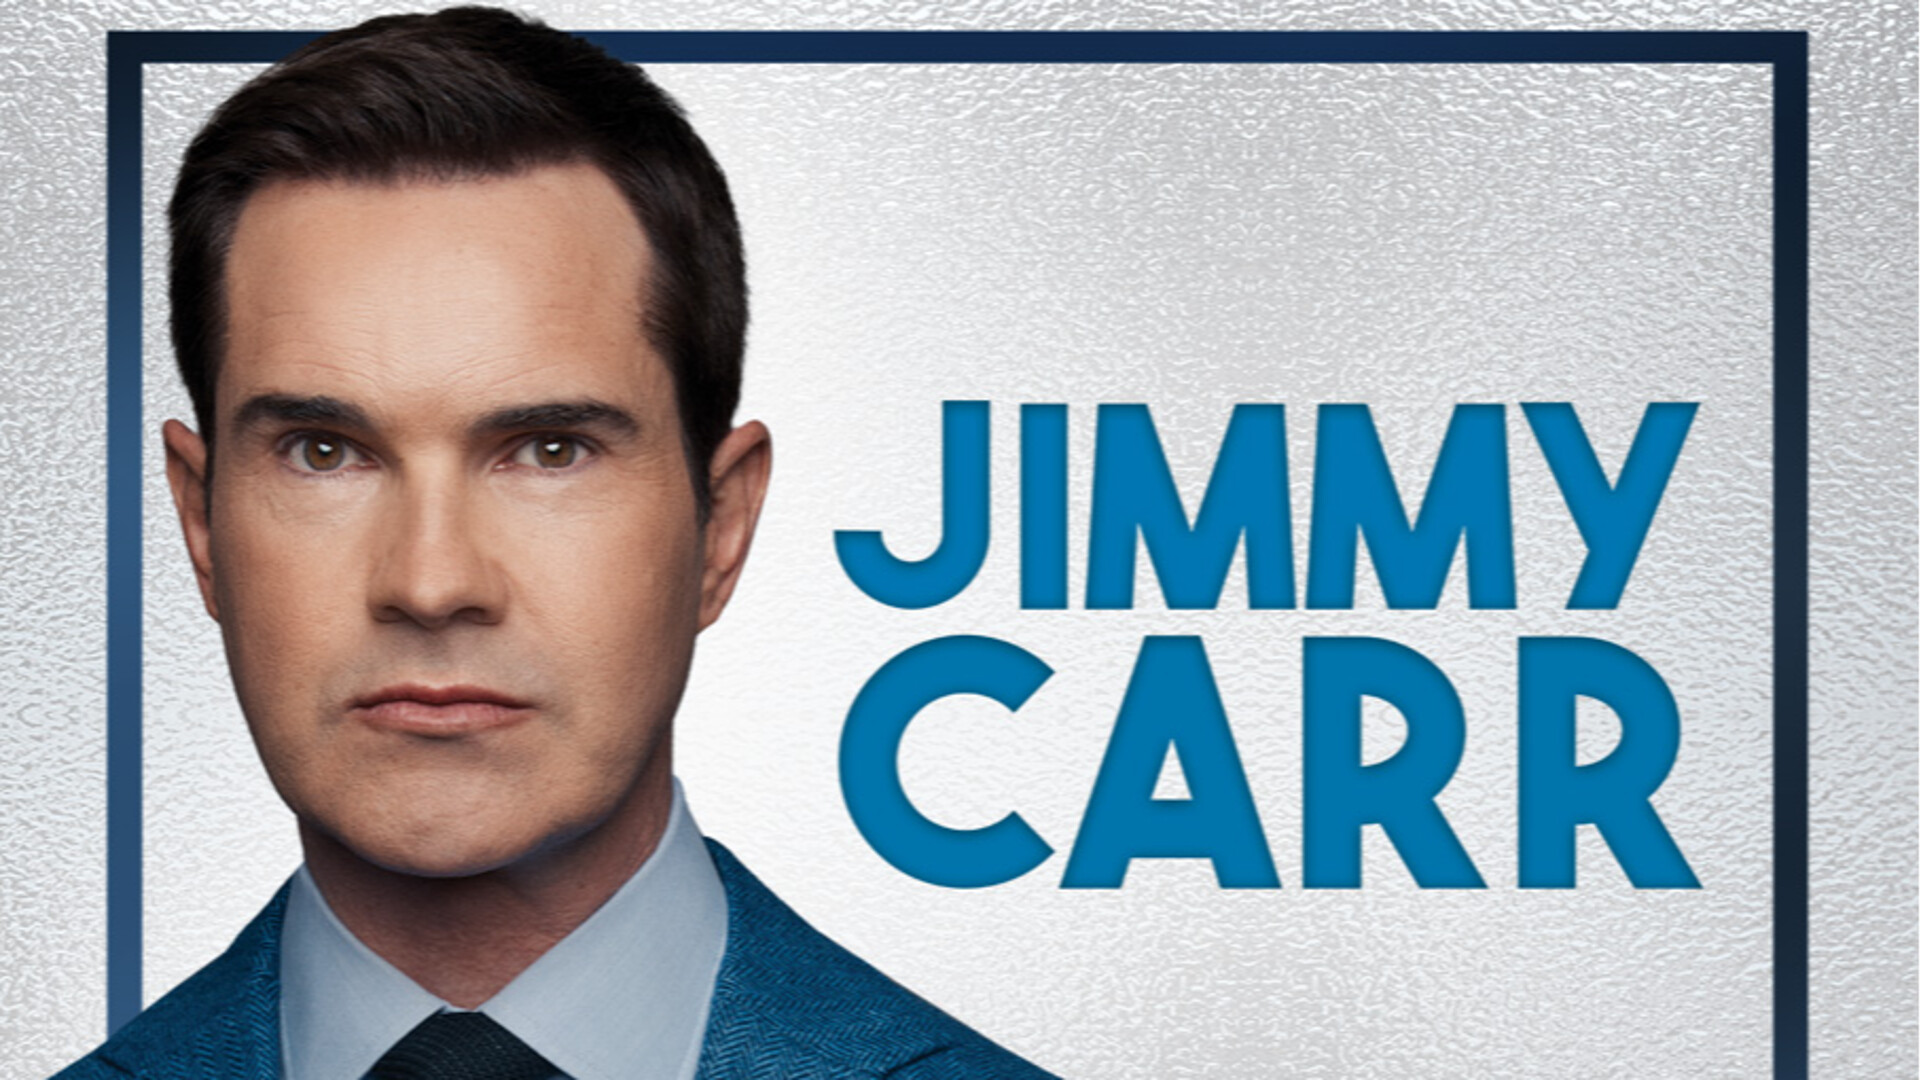 Jimmy Carr: Regularly performing across the UK, A part of the Terribly Funny tour, Comedy career since 1997. 1930x1080 HD Background.